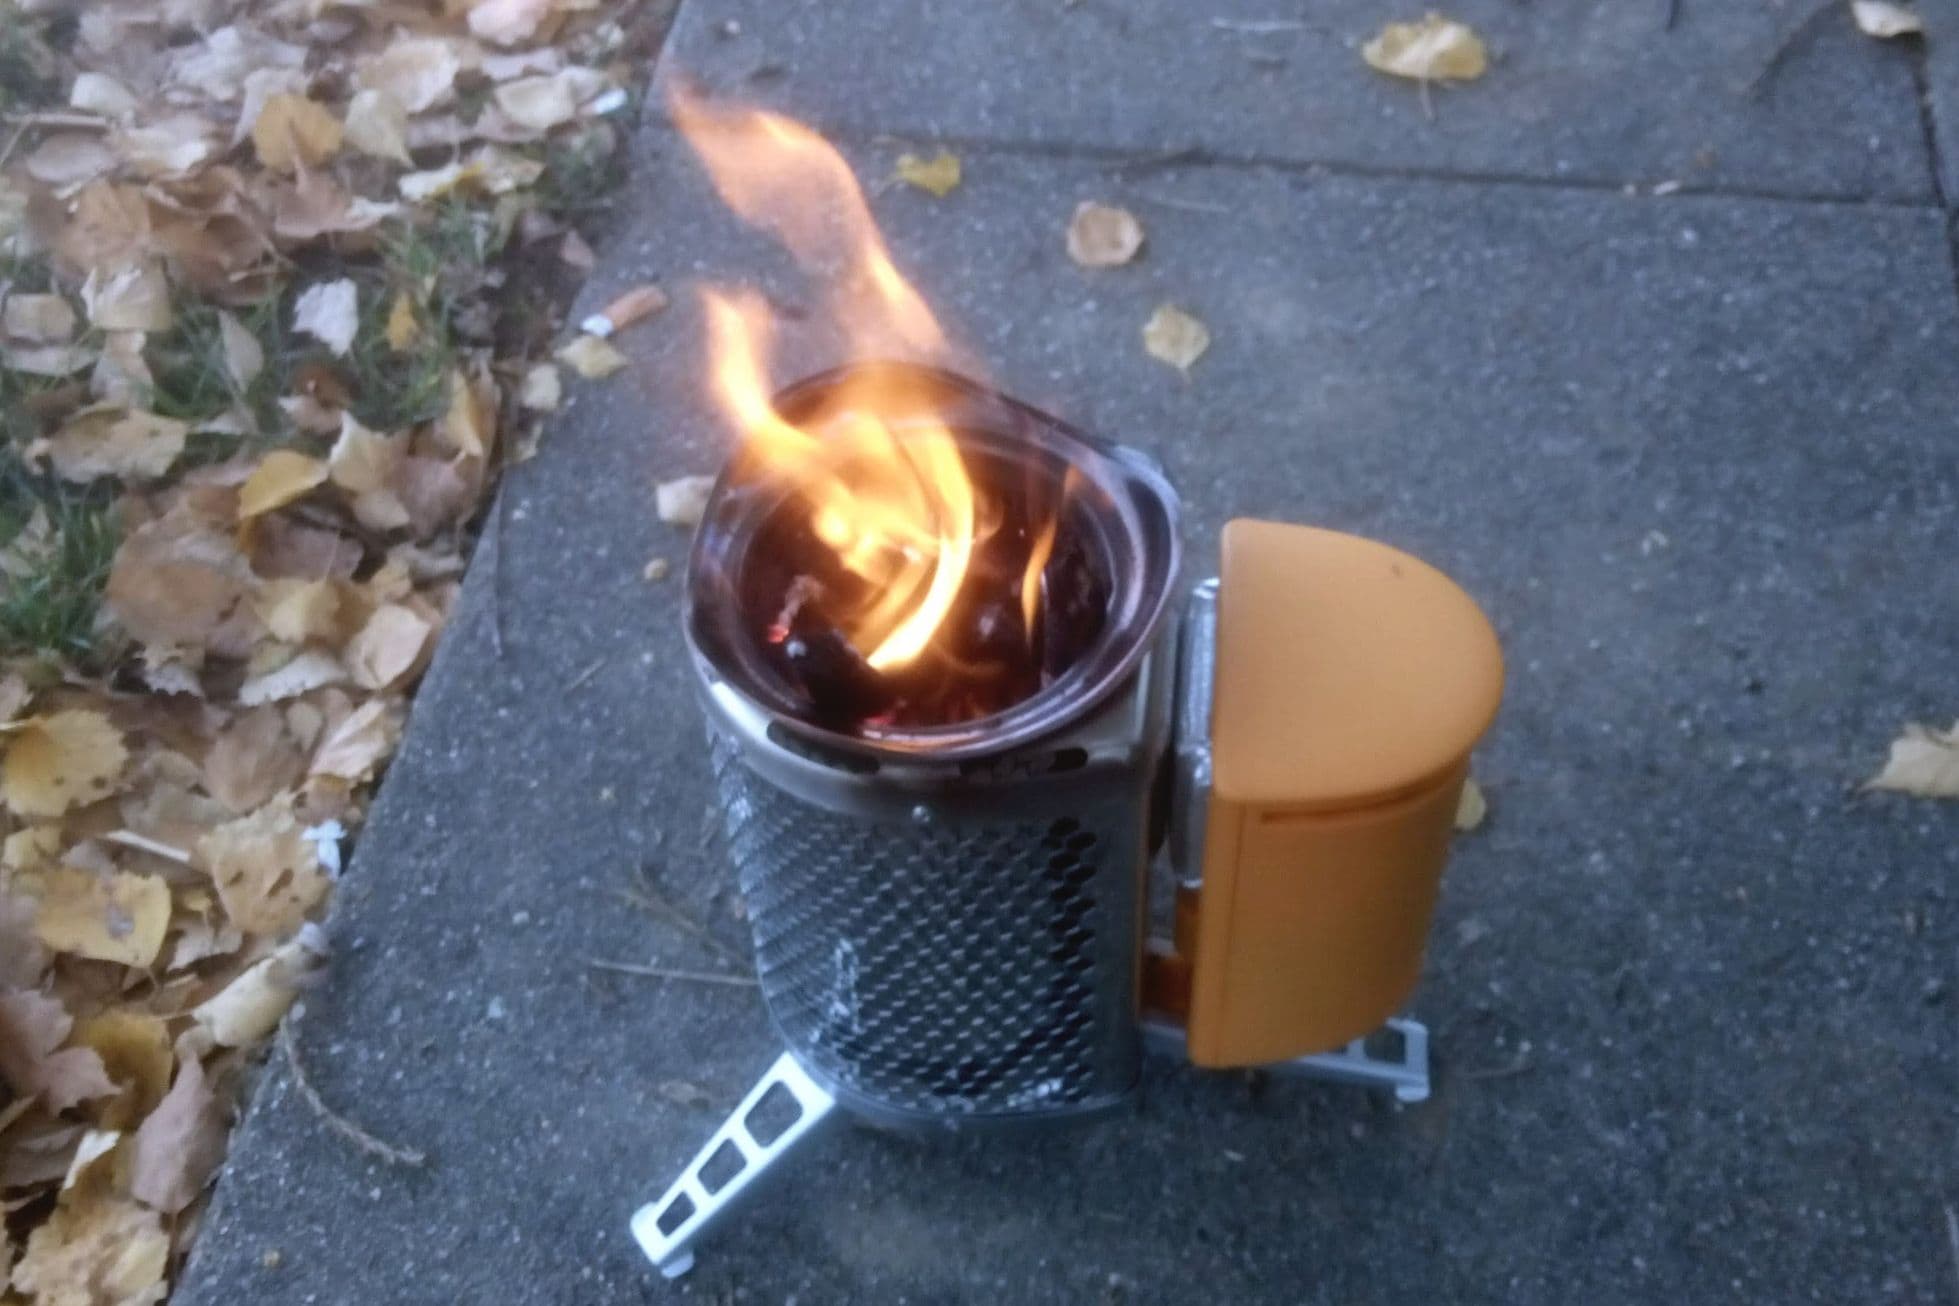 The Biolite campstove in action